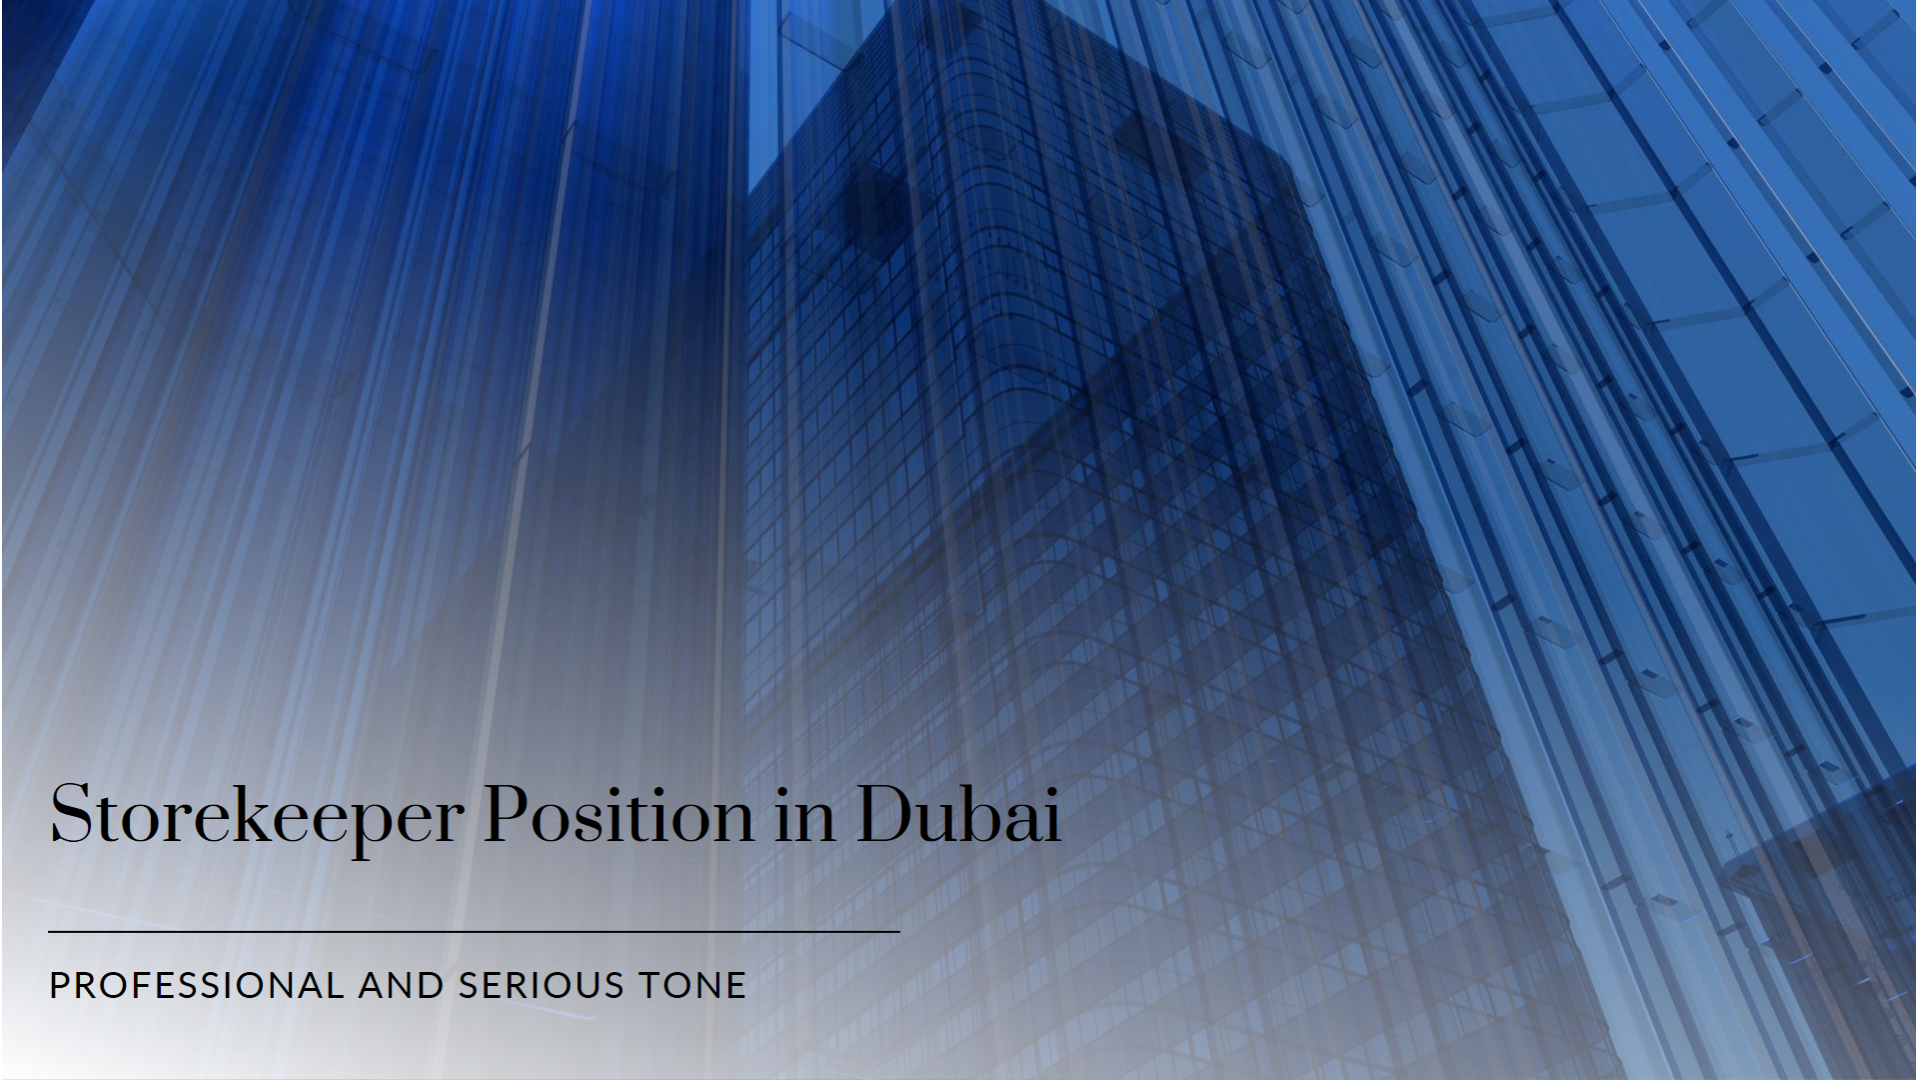 Jobs in Dubai for all nationalities